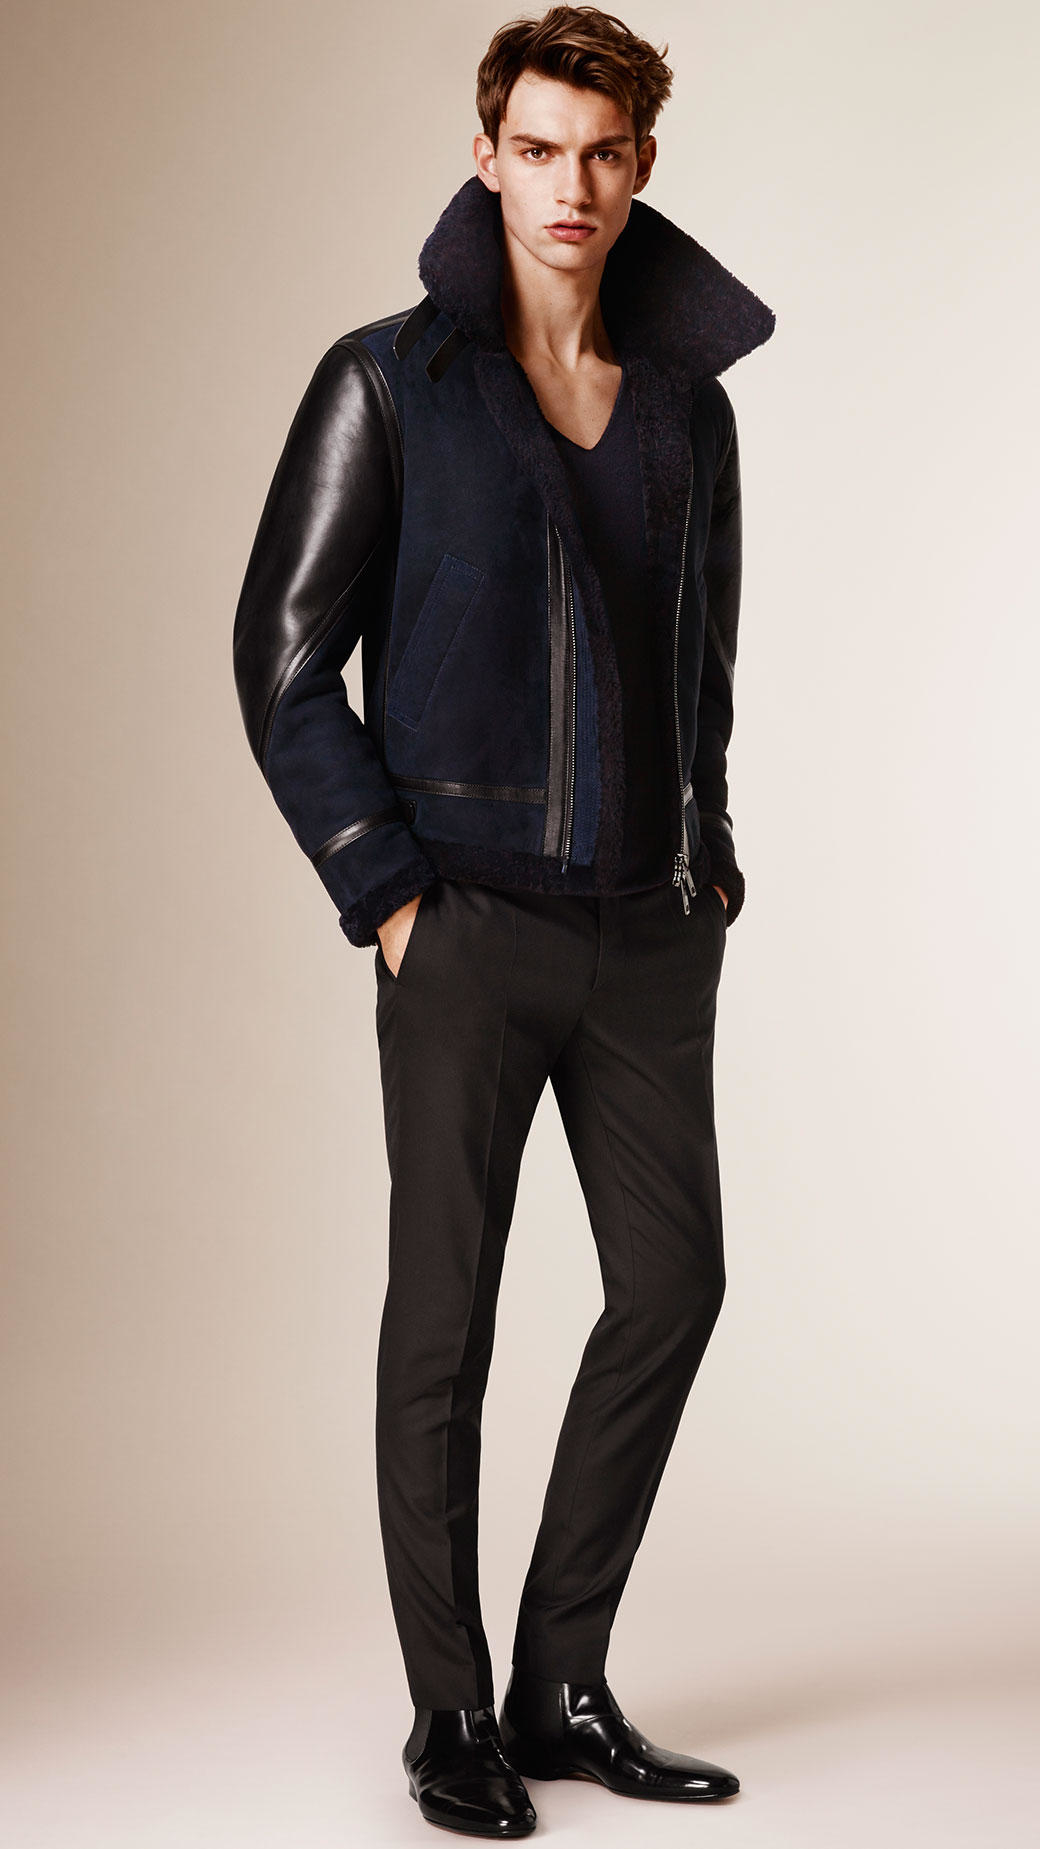 Lyst - Burberry Shearling Aviator Jacket in Blue for Men